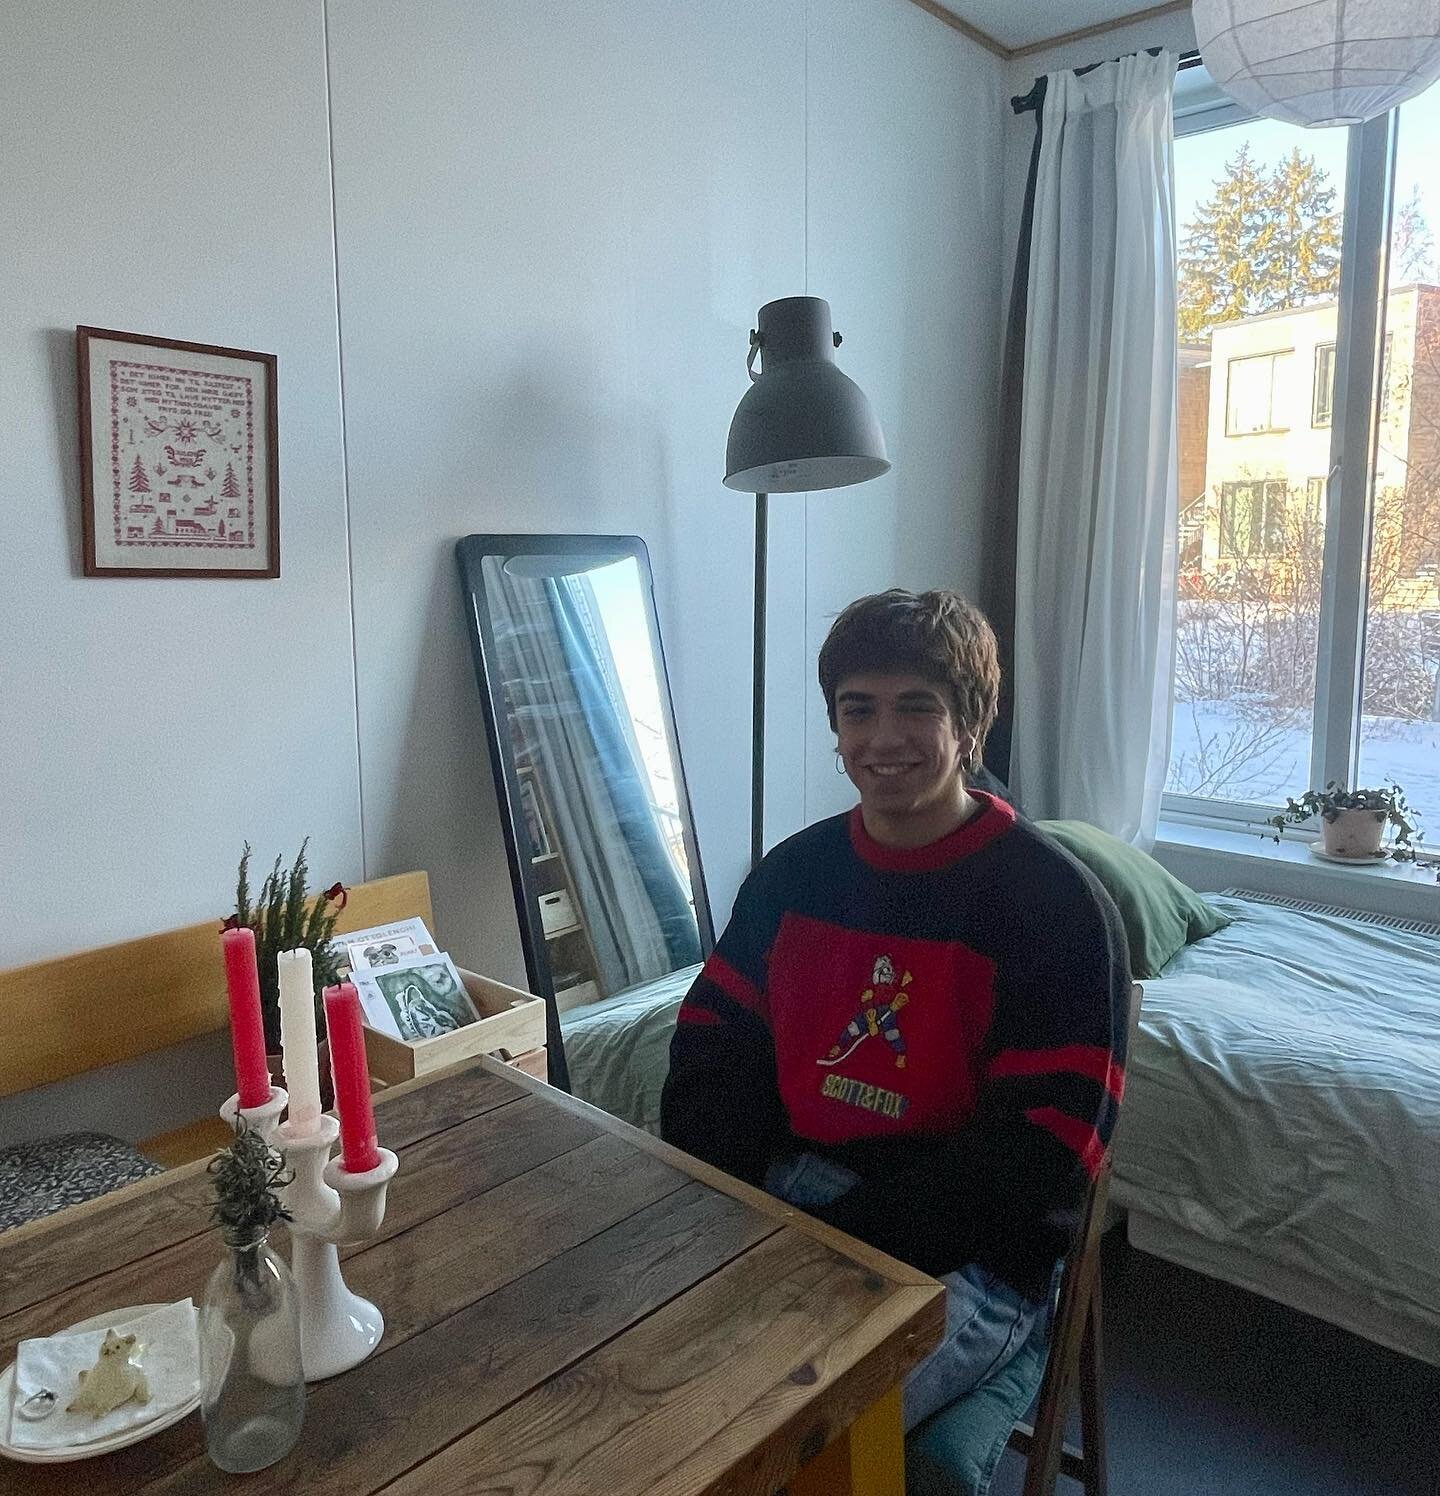 Here are some snapshots from @lozano_mag cozy room in @cphvillage Vesterbro. Since he moved in last summer he managed to find some amazing second hand pieces around Copenhagen.🪑🪴 Great to see villagers choosing mindful living choices!